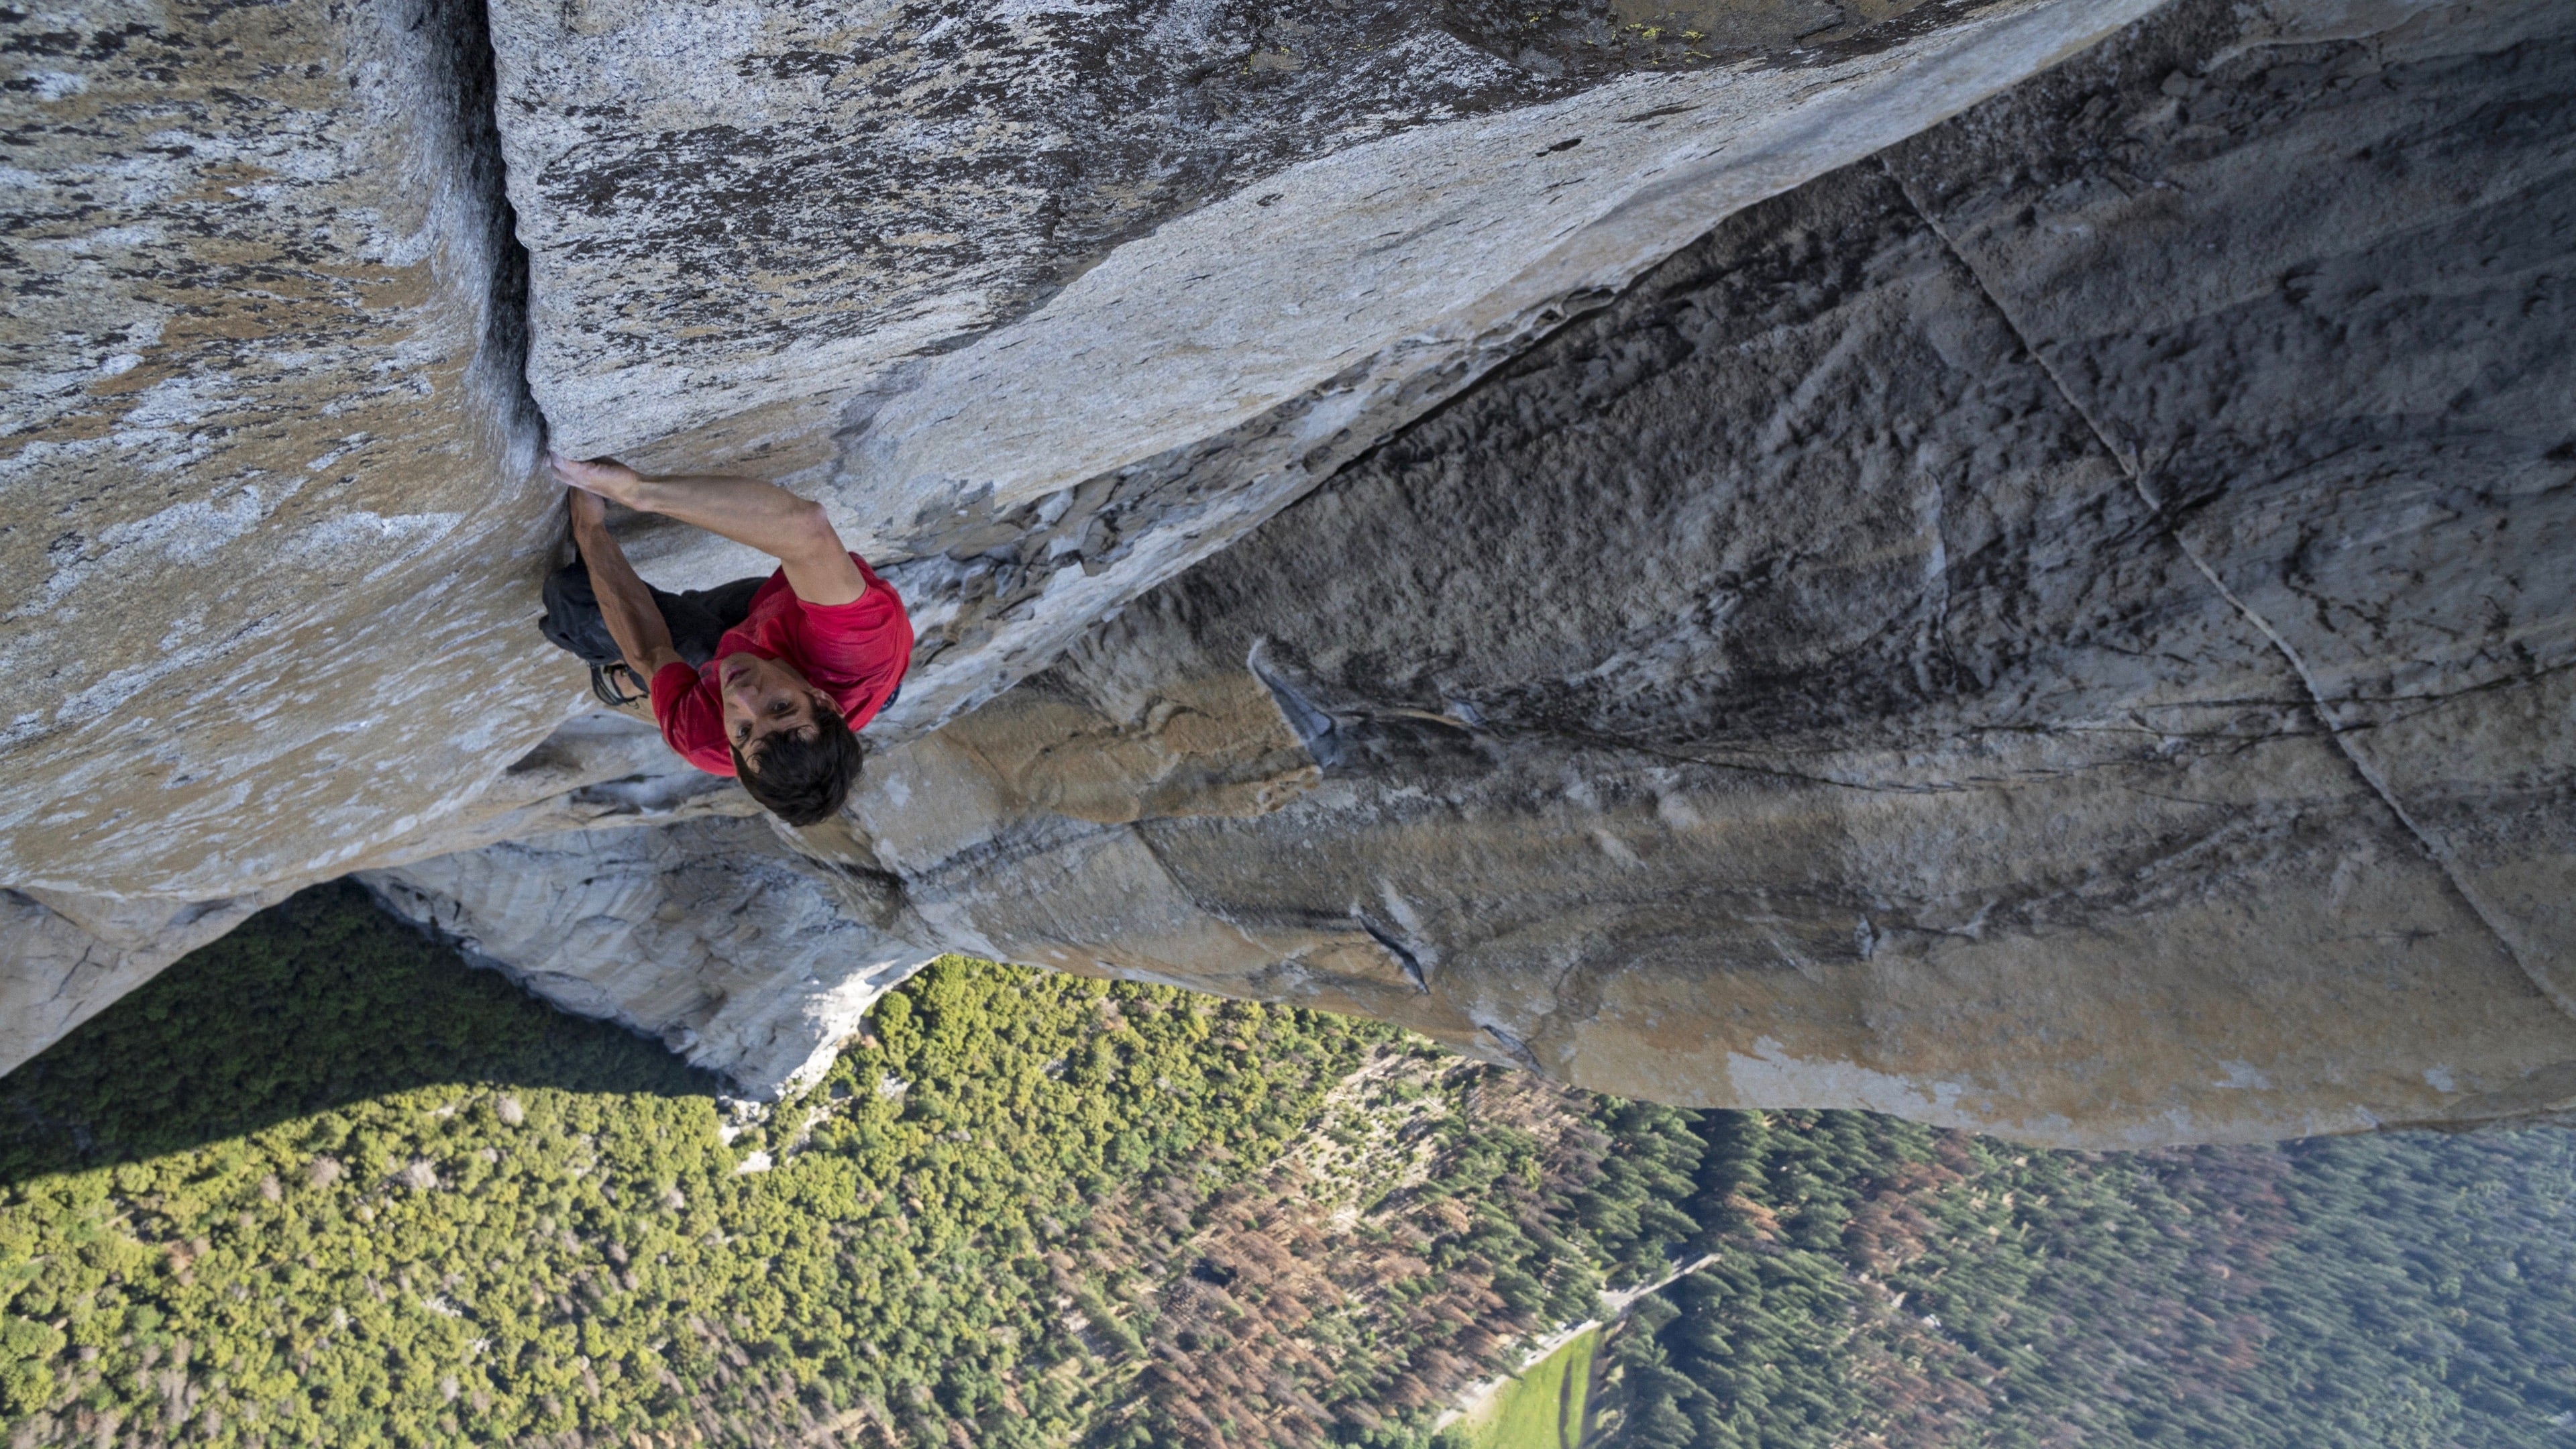 Free Solo 2018 123movies